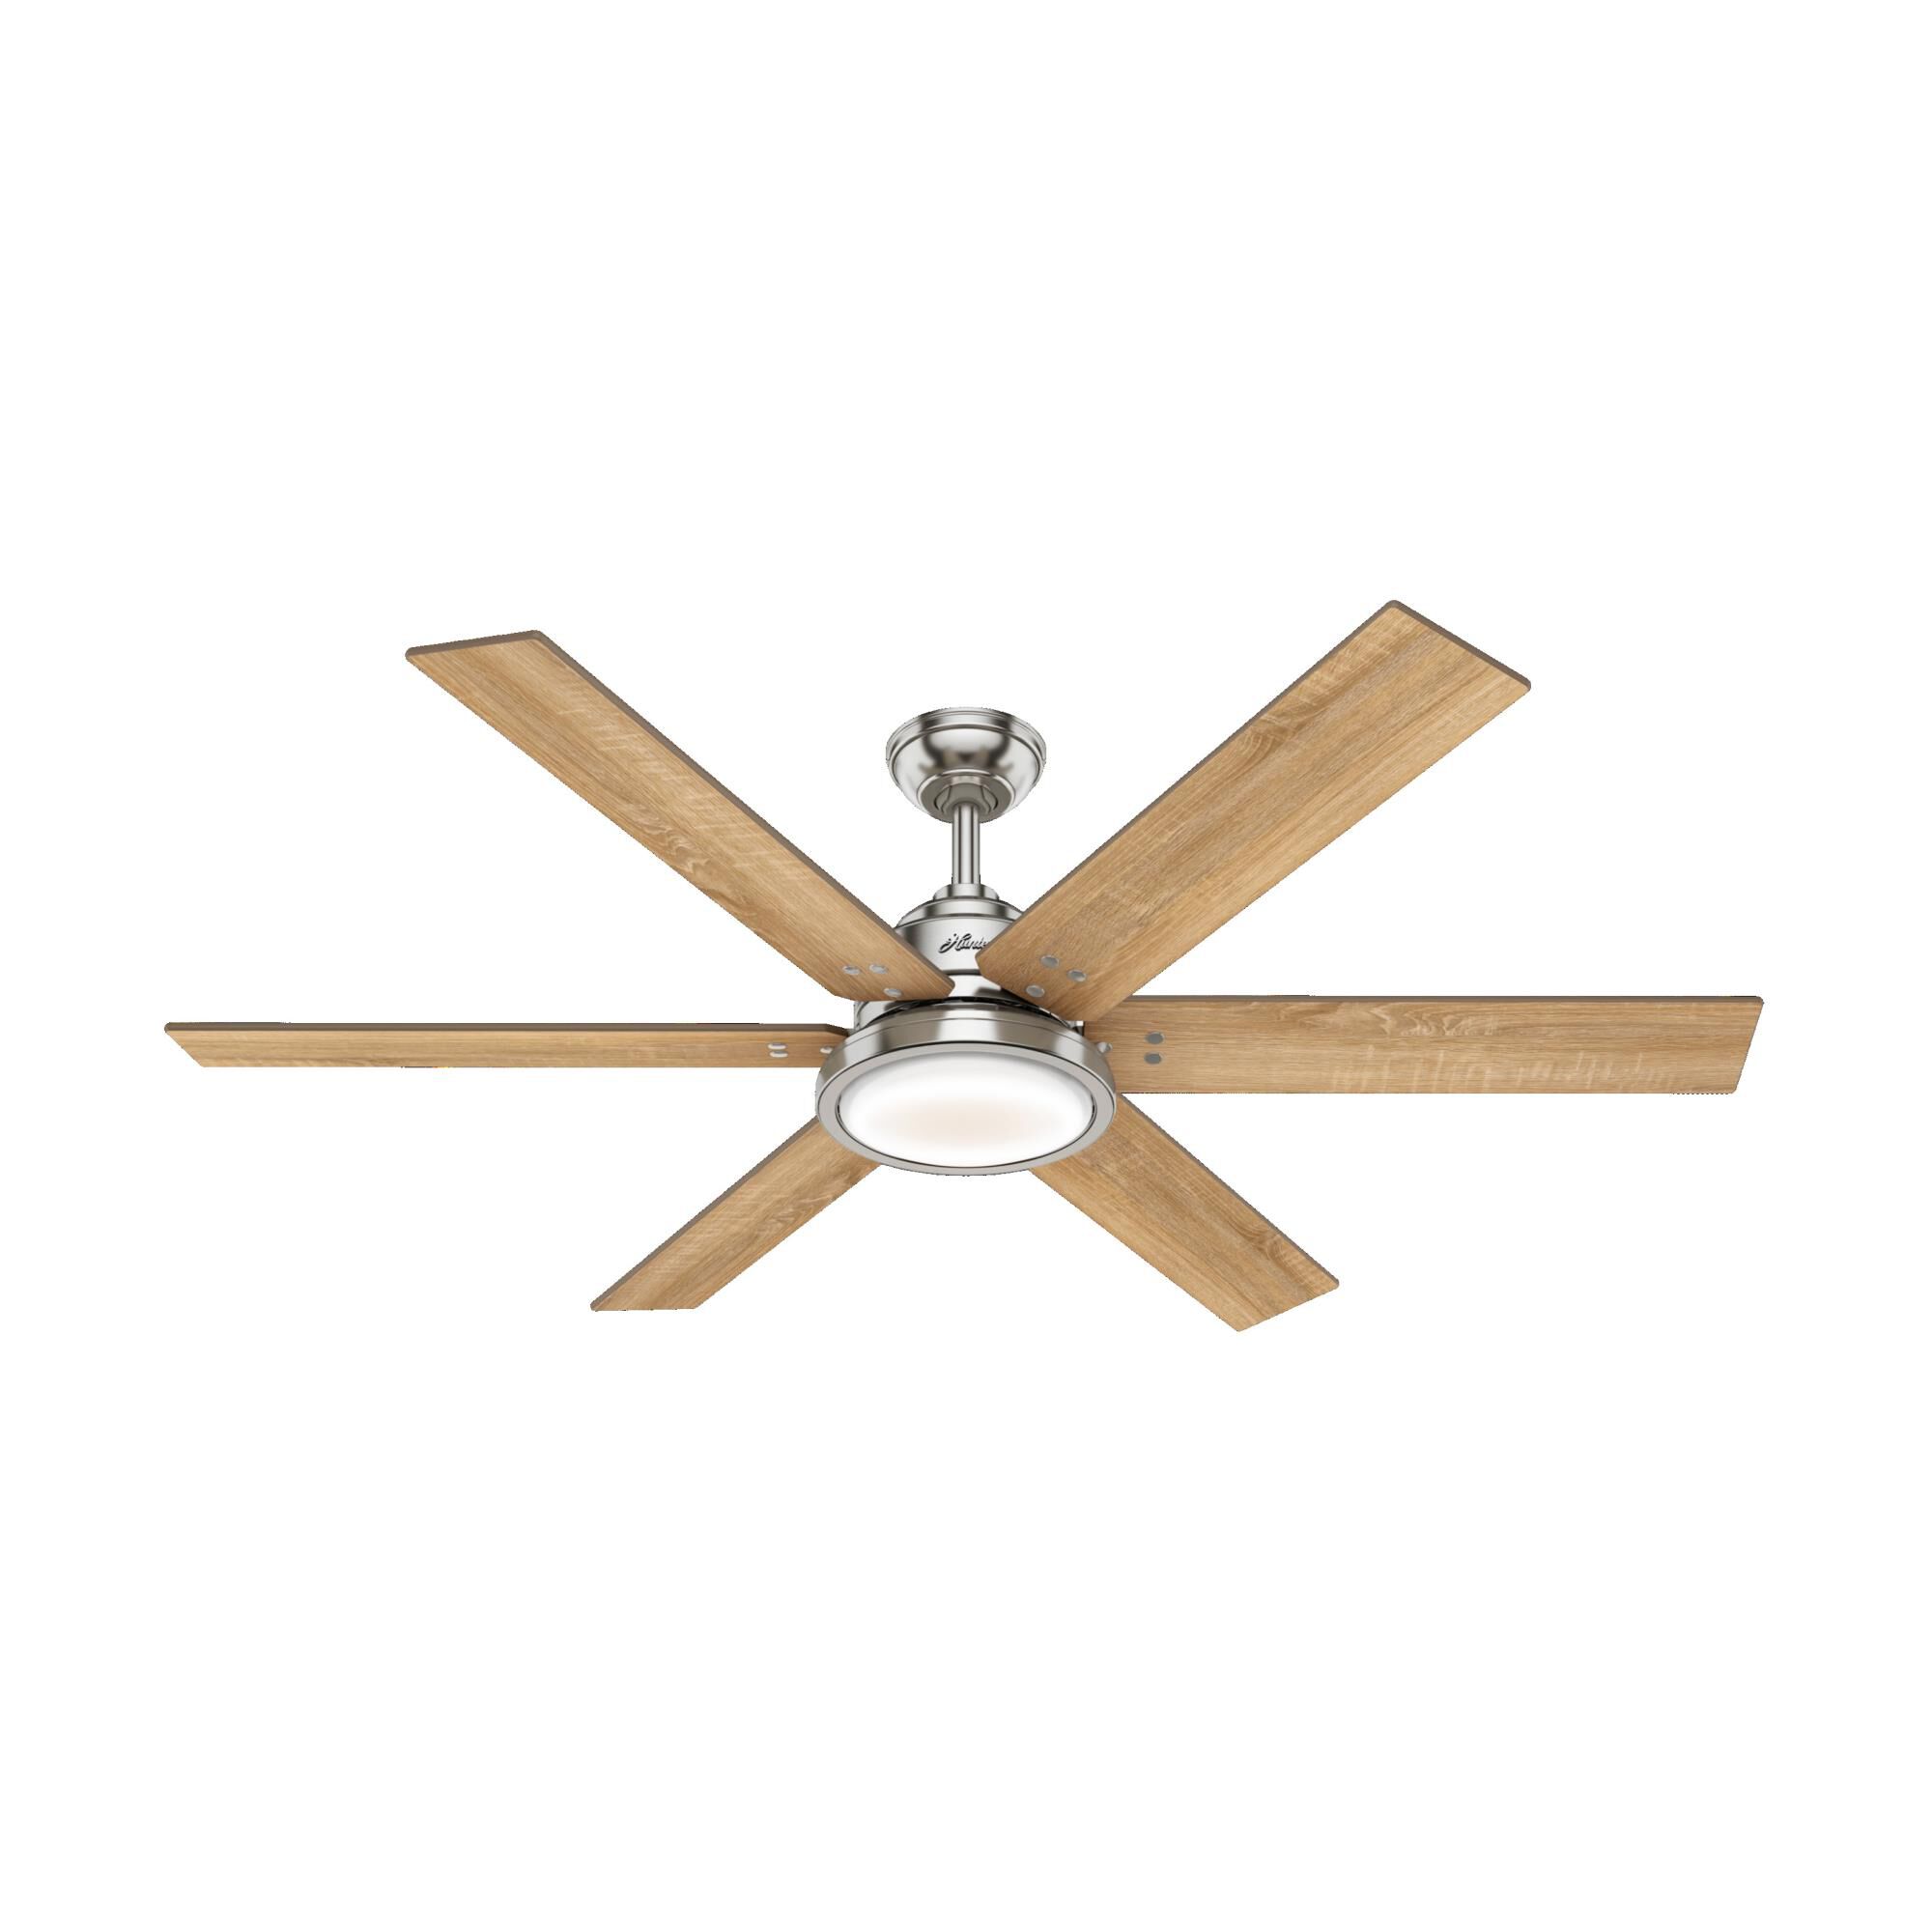 Photos - Fan Hunter  Warrant 60 Inch Ceiling  with Light Kit Warrant - 59462 - Mo 